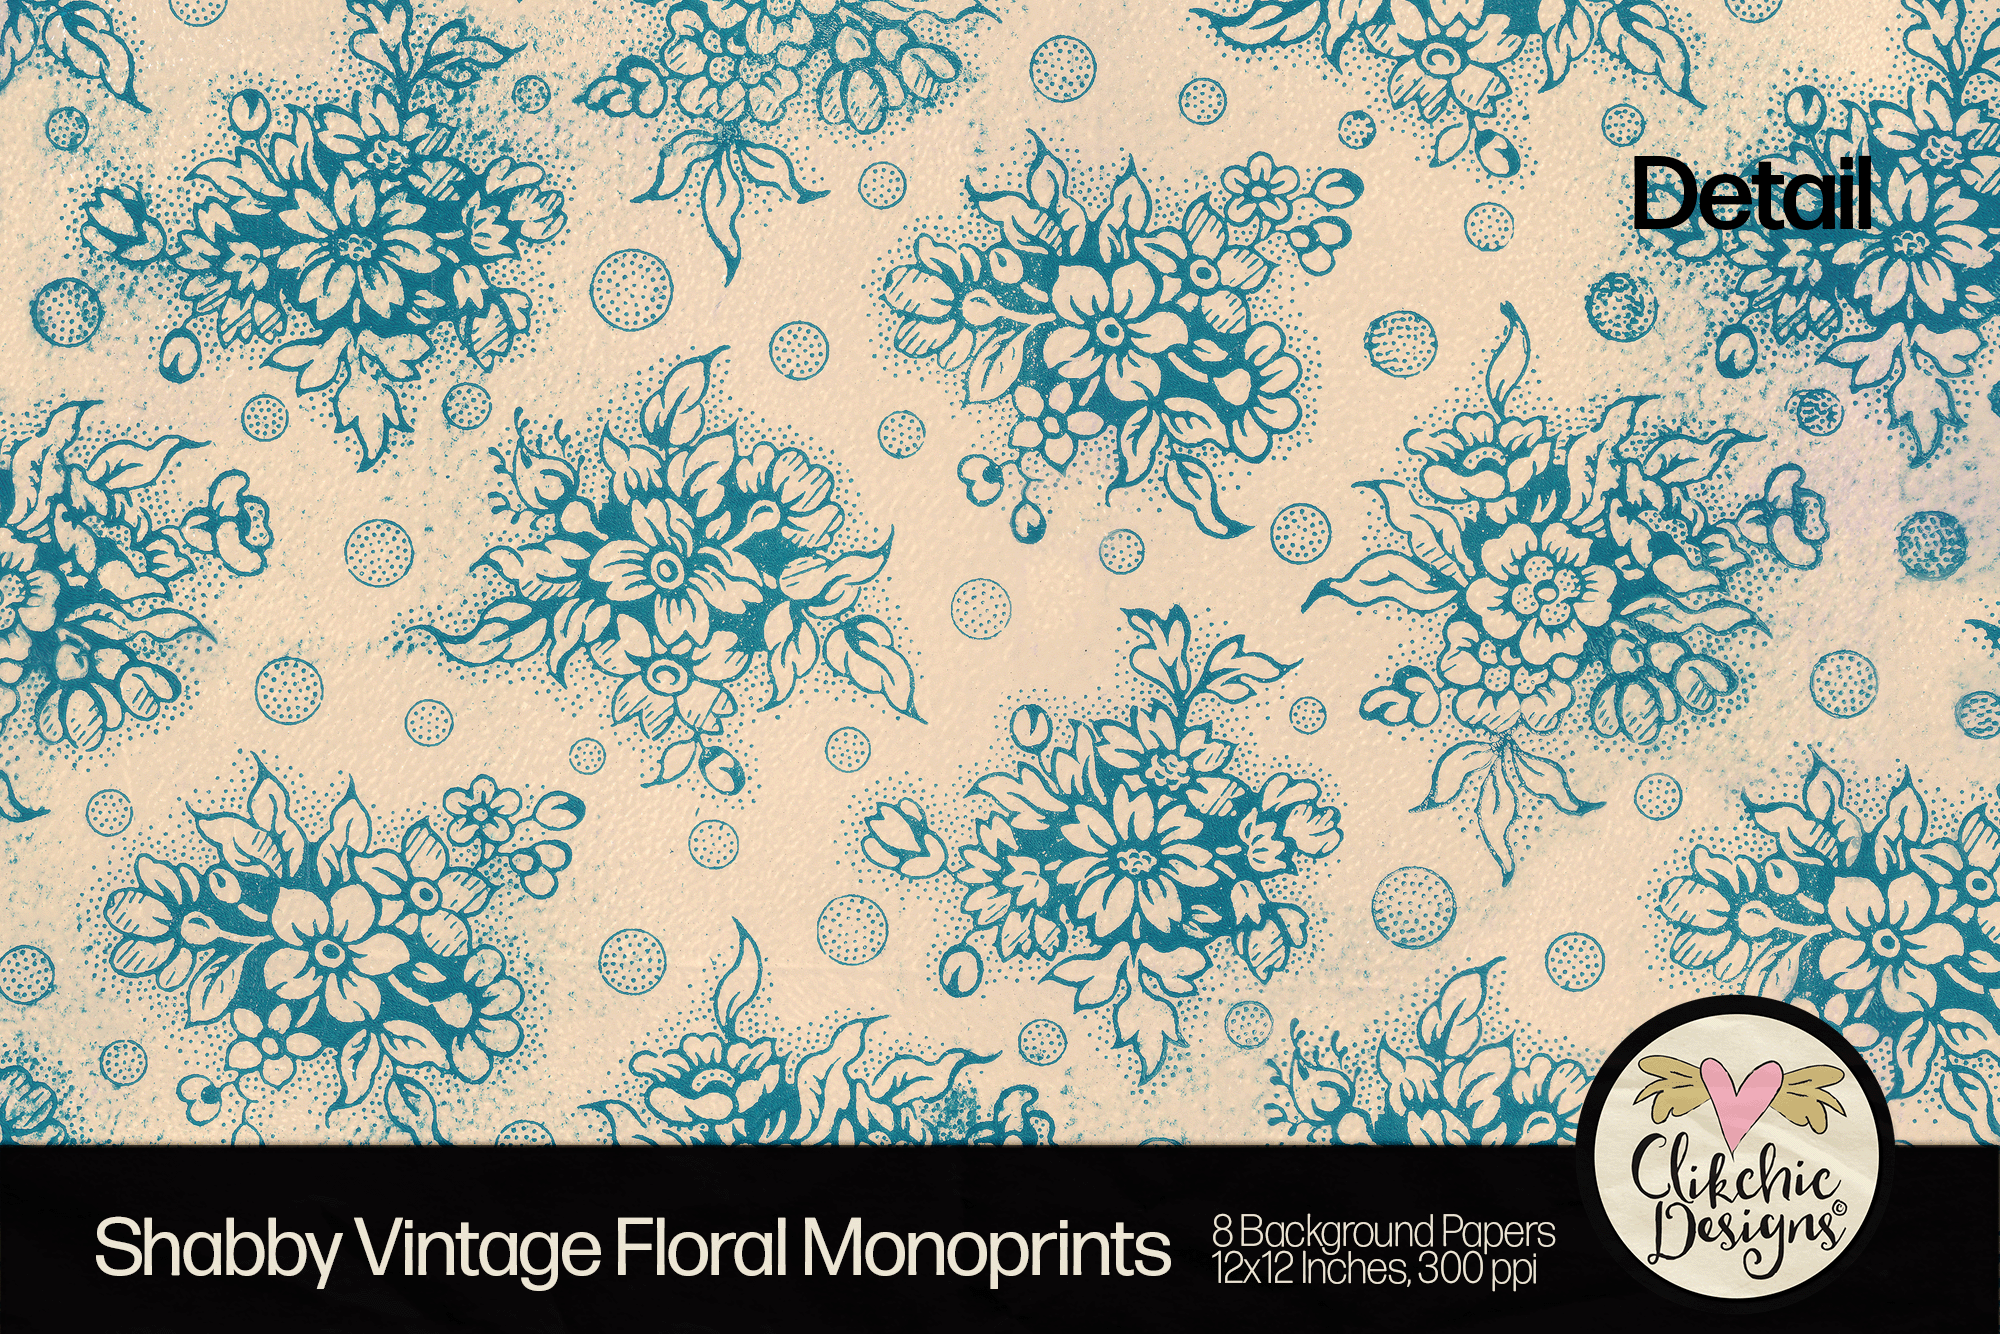 Shabby Floral Vintage Monoprint Backgrounds by Clikchic Designs